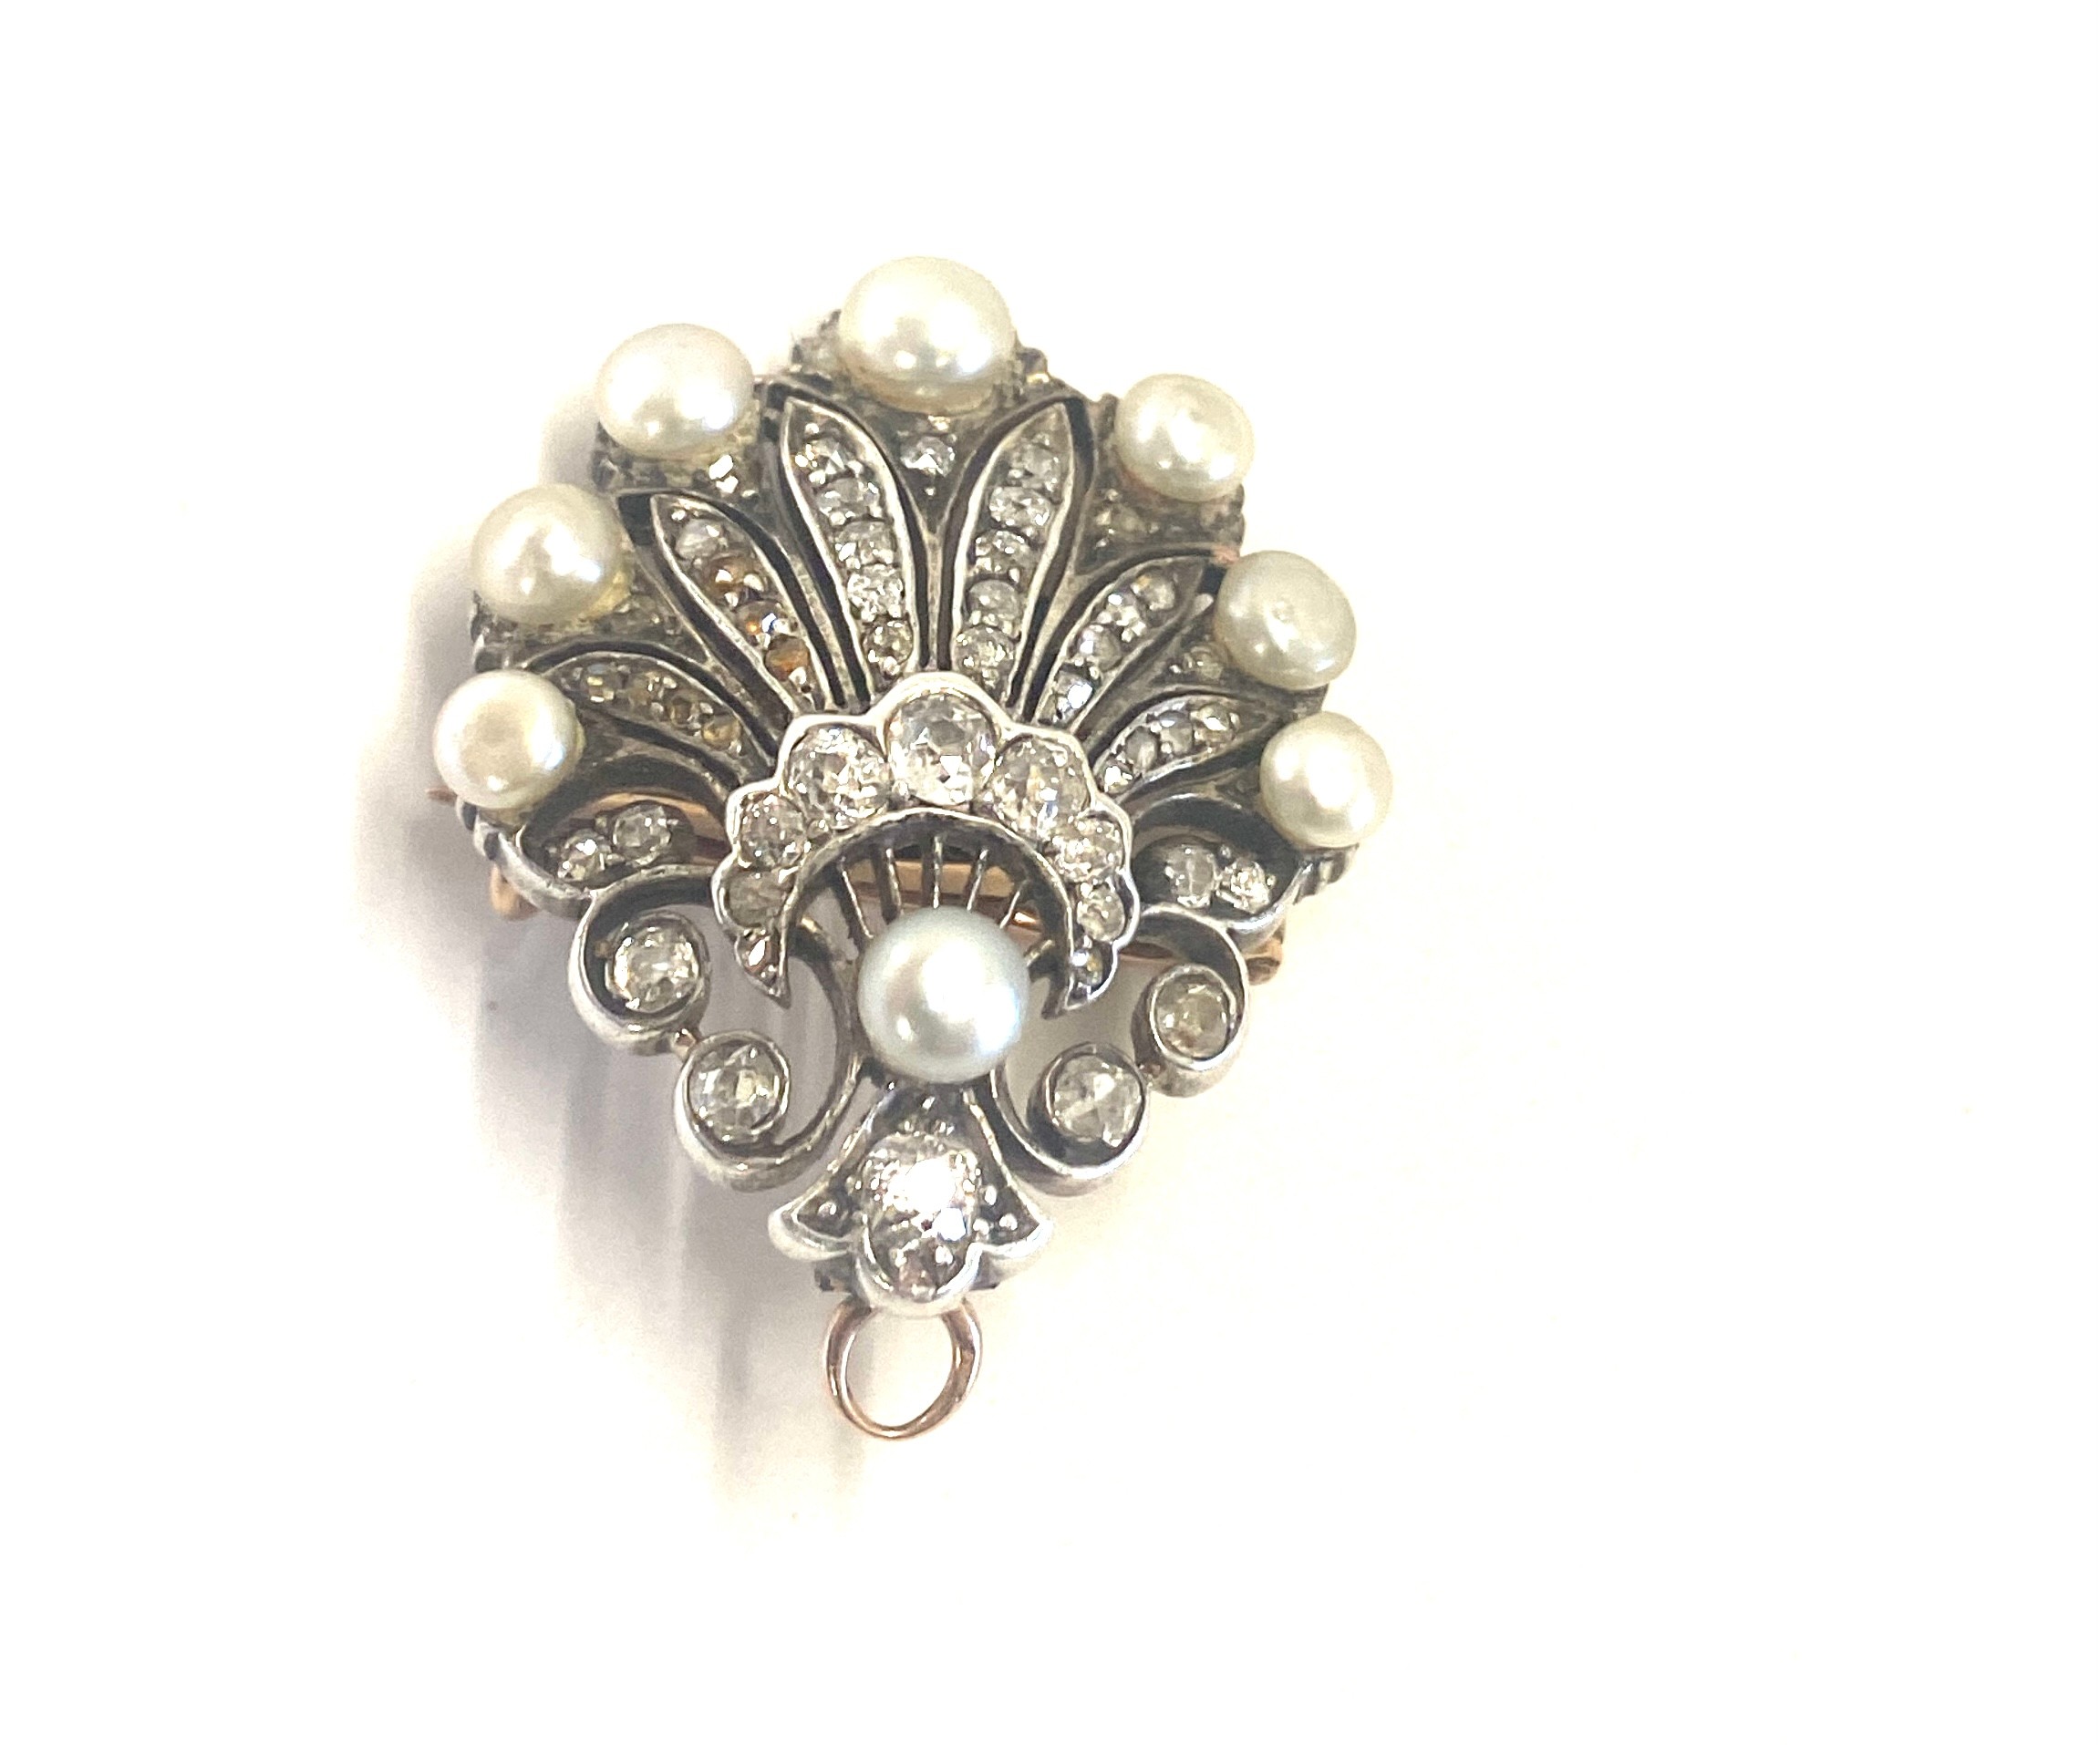 Antique natural pearl and diamond gold backed brooch/ pendant. Measures 4cm tall 3 cm wide. - Image 3 of 8